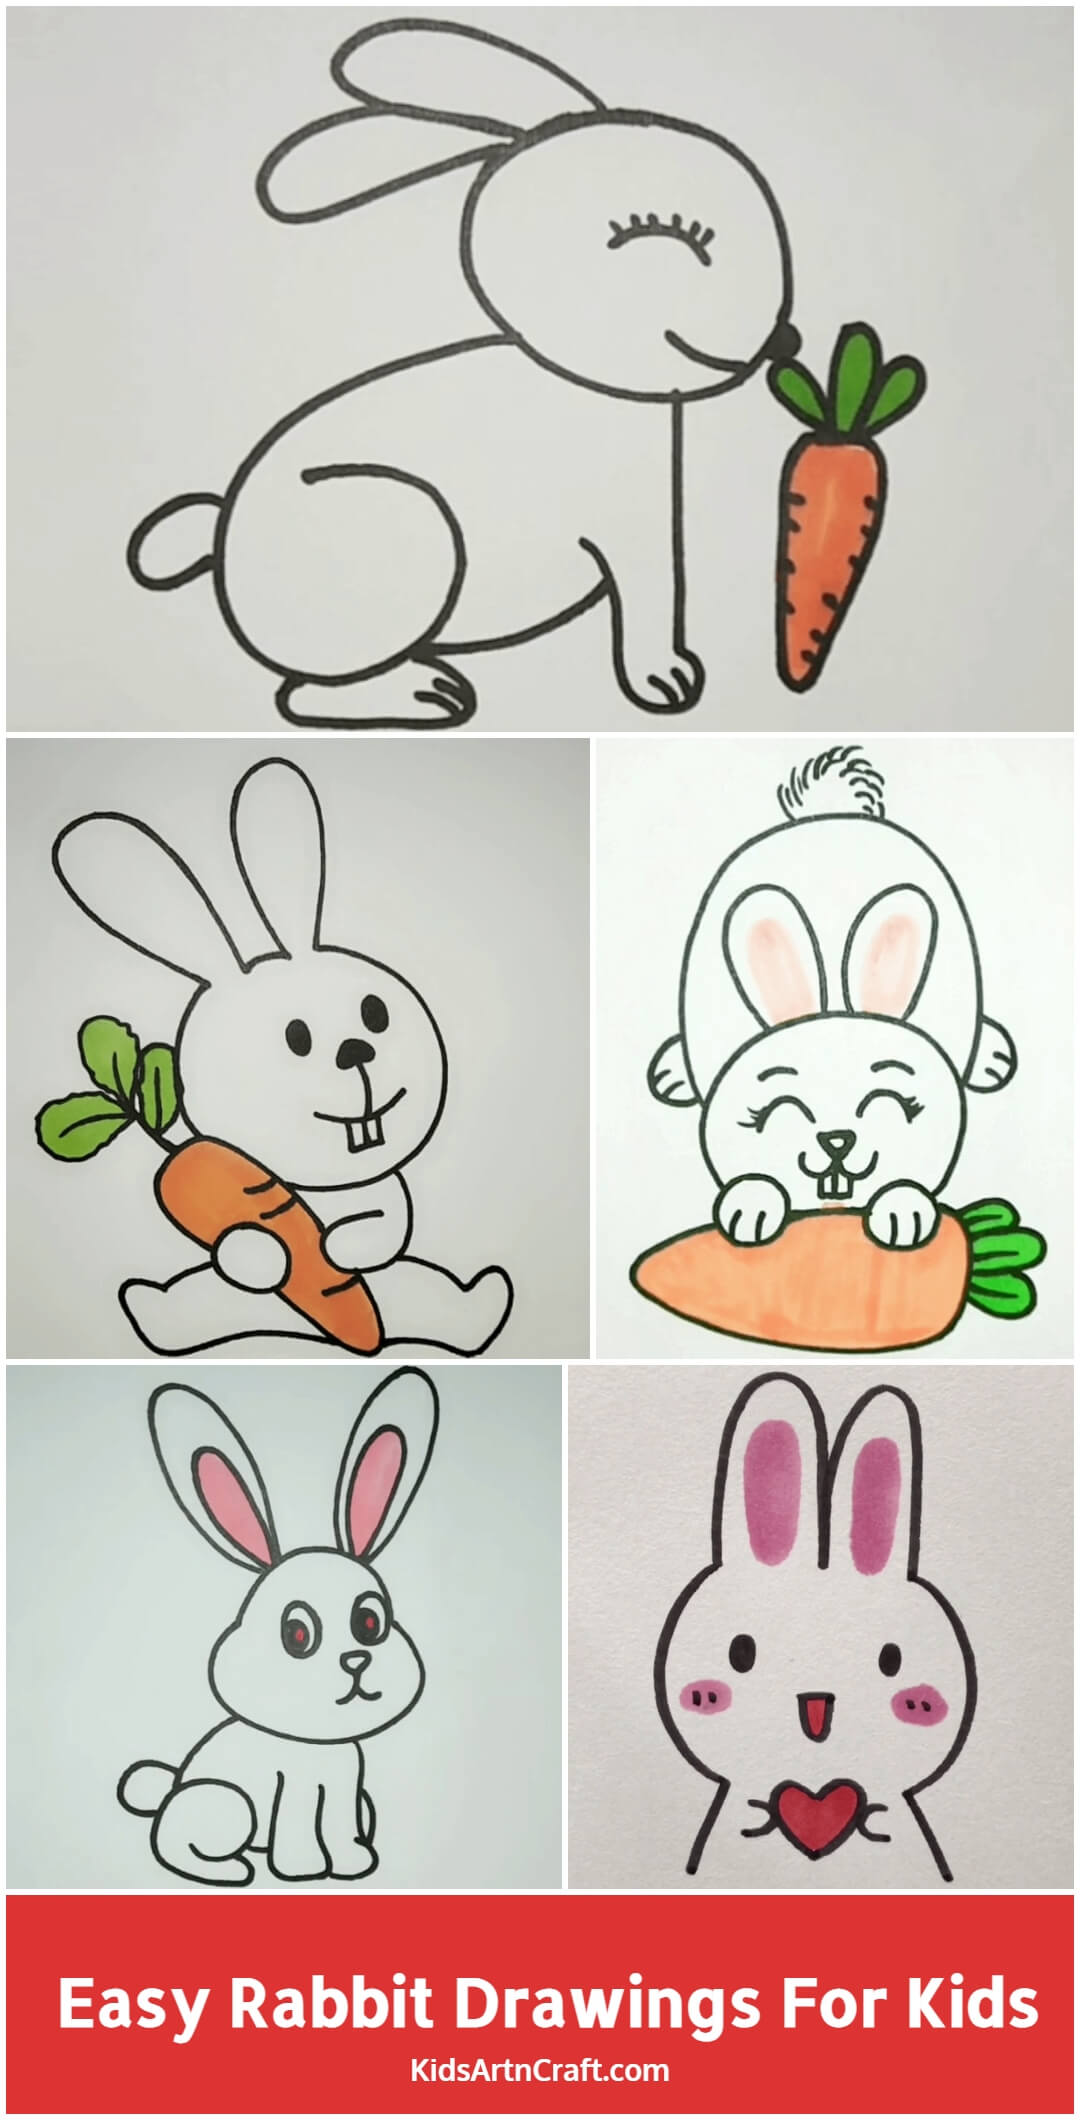 How to Draw a Rabbit - Really Easy Drawing Tutorial